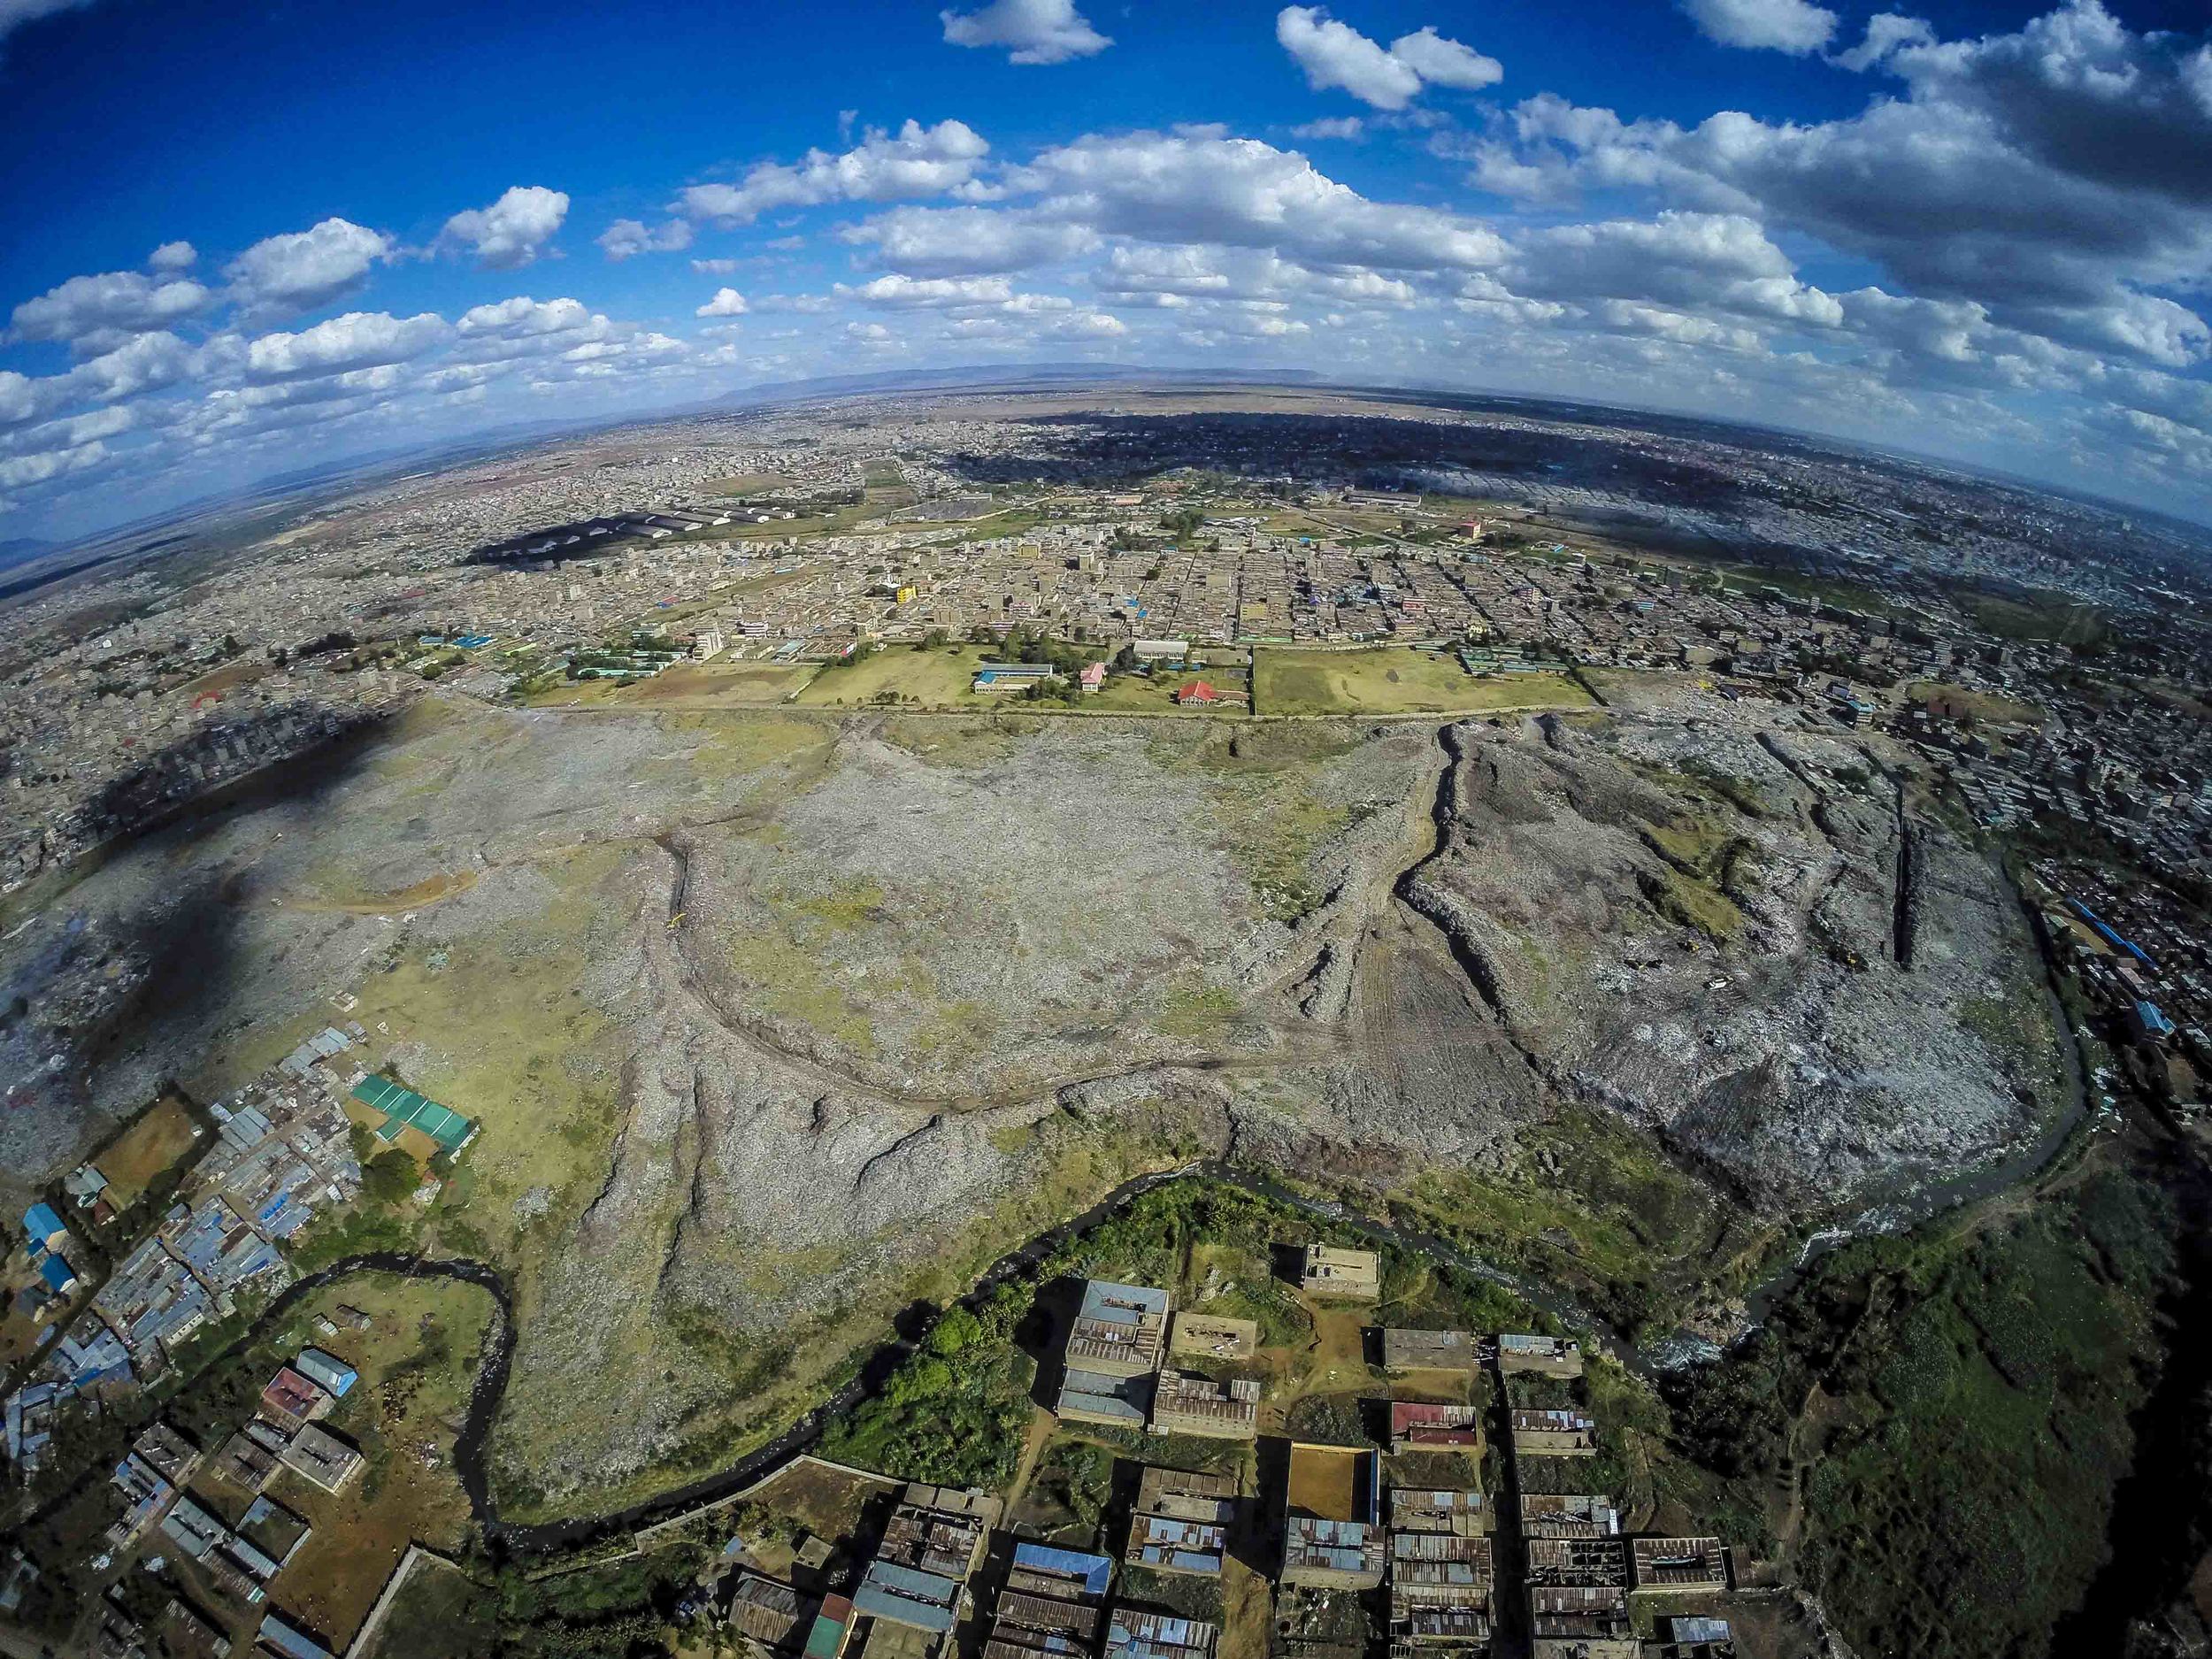  This former quarry is now one of the largest dumpsites in Africa at 30 acres. It opened 40 years ago by City Council as a temporary solution for waste management - it was declared full in 2001. After plans to move the site to Ruai fell through in Ja